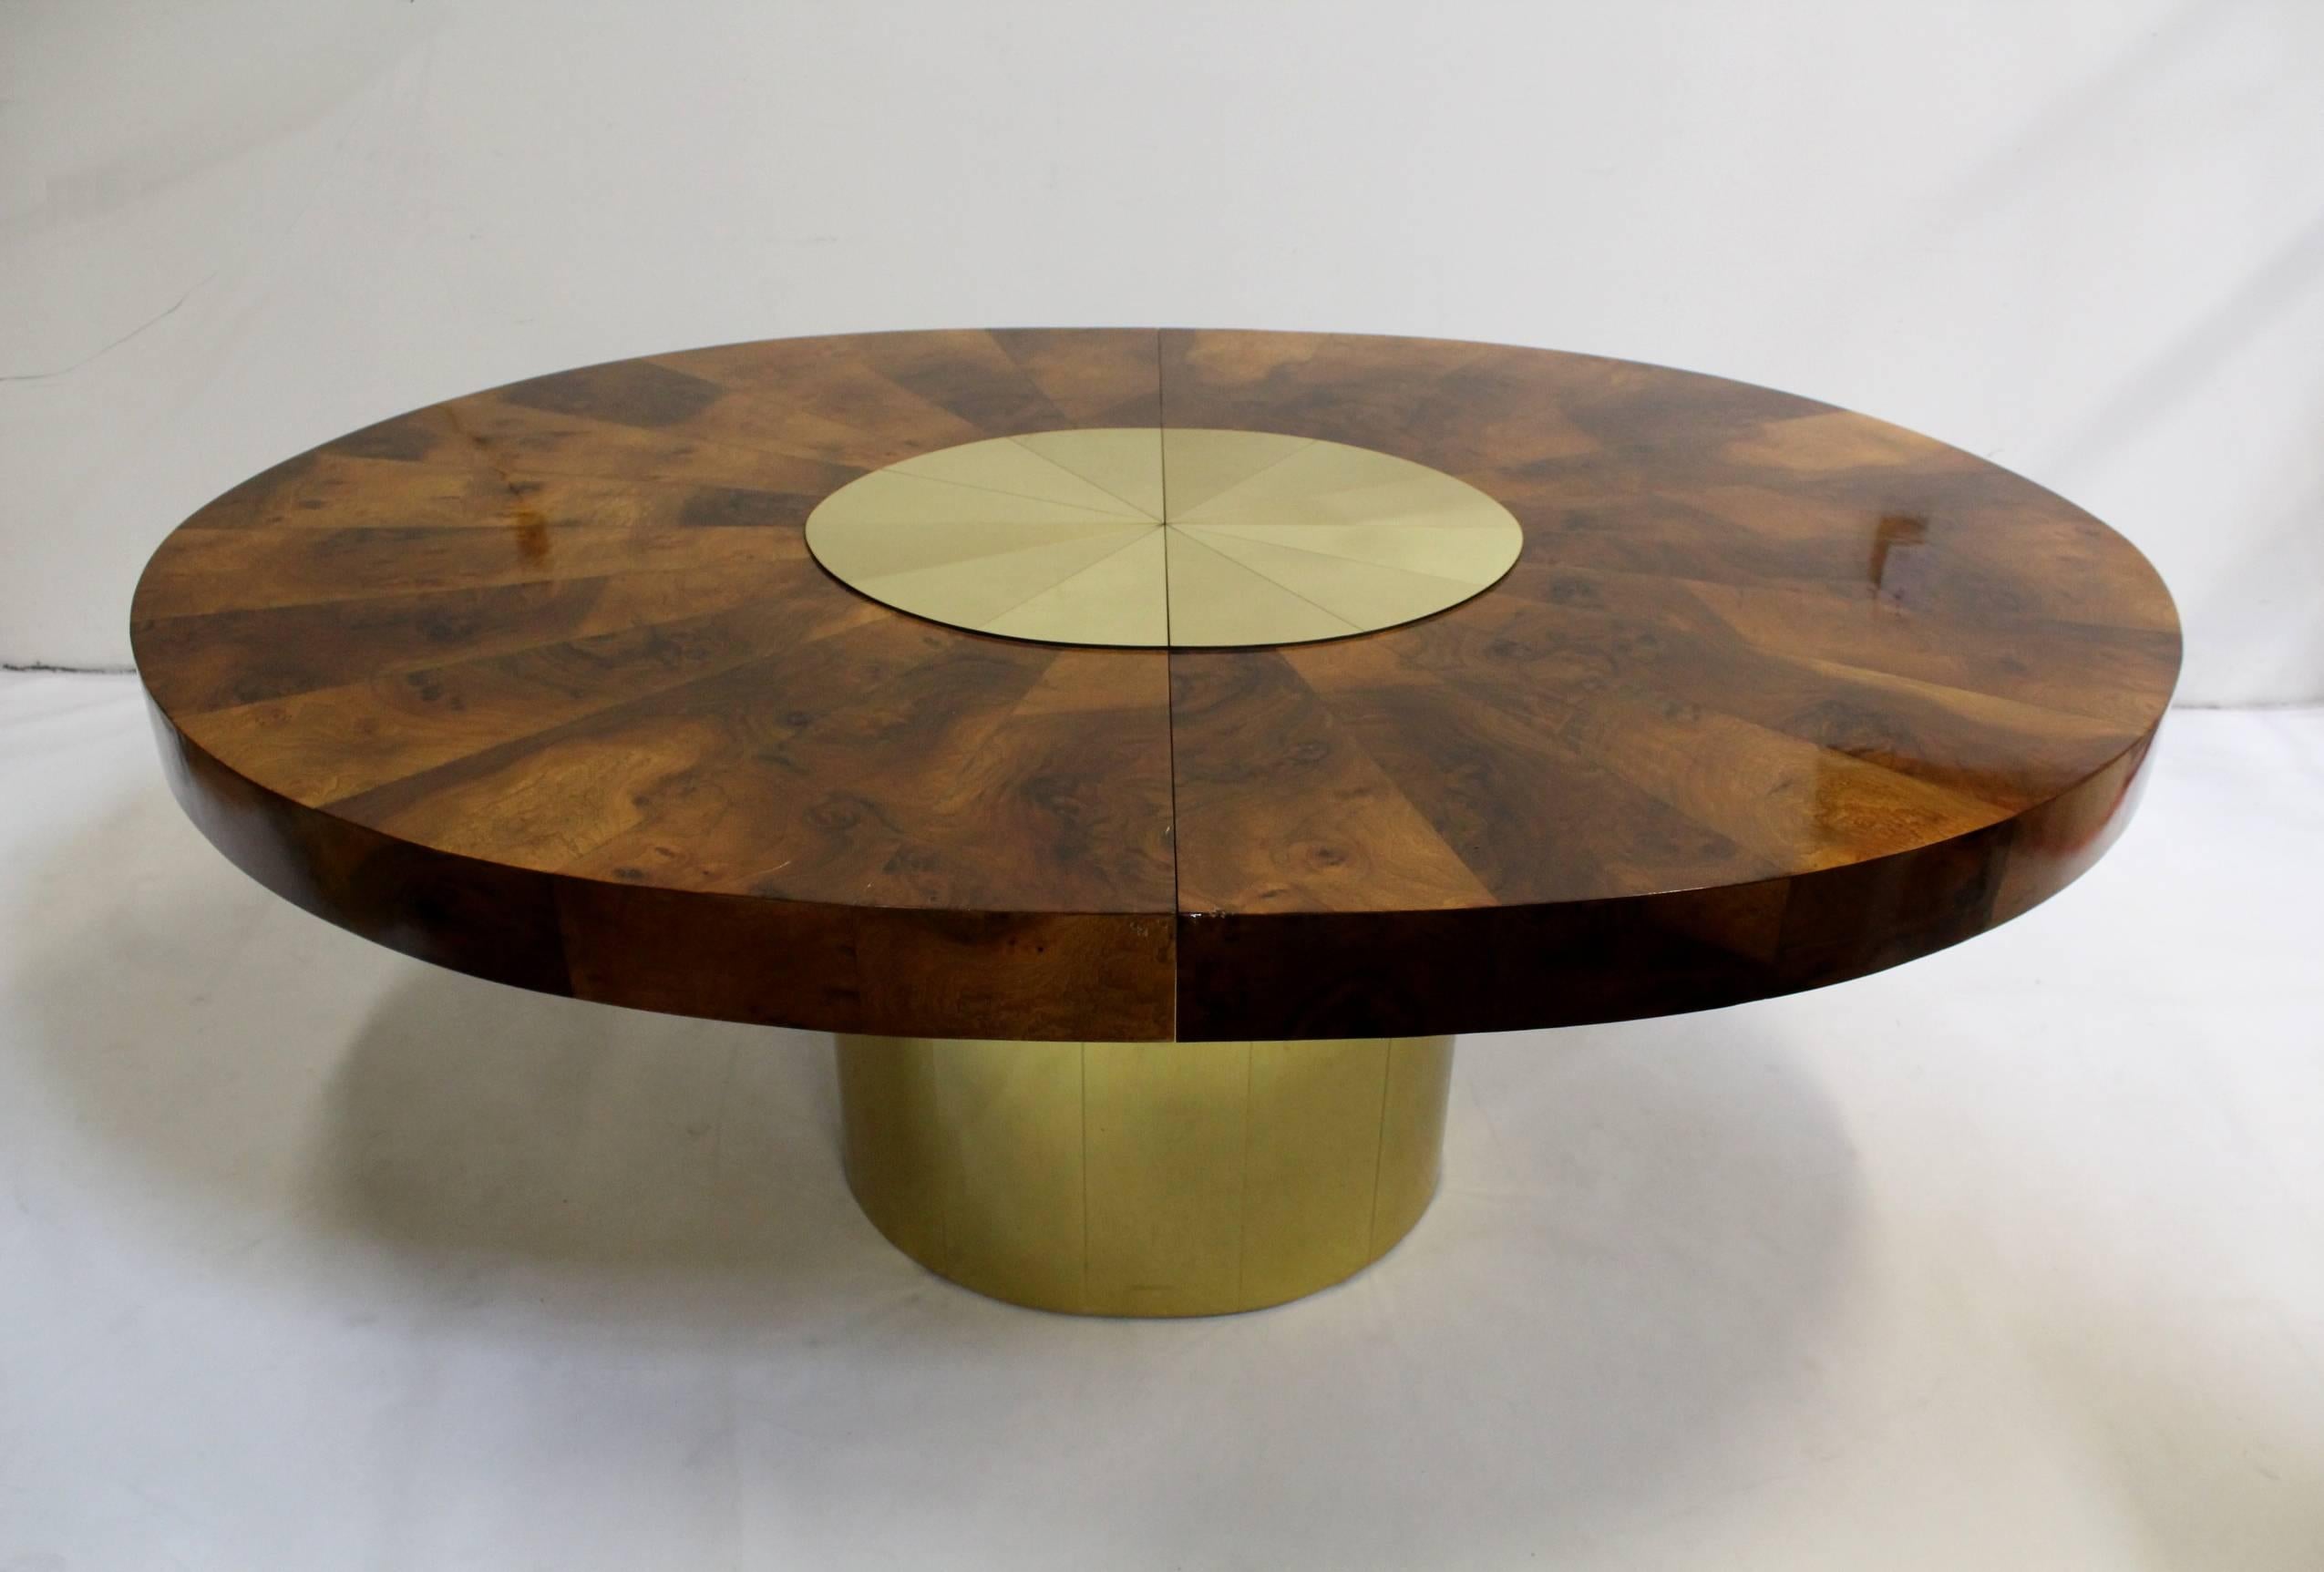 20th Century Brass and Wood Sunburst Paul Evans for Directional Large Oval Dining Table For Sale